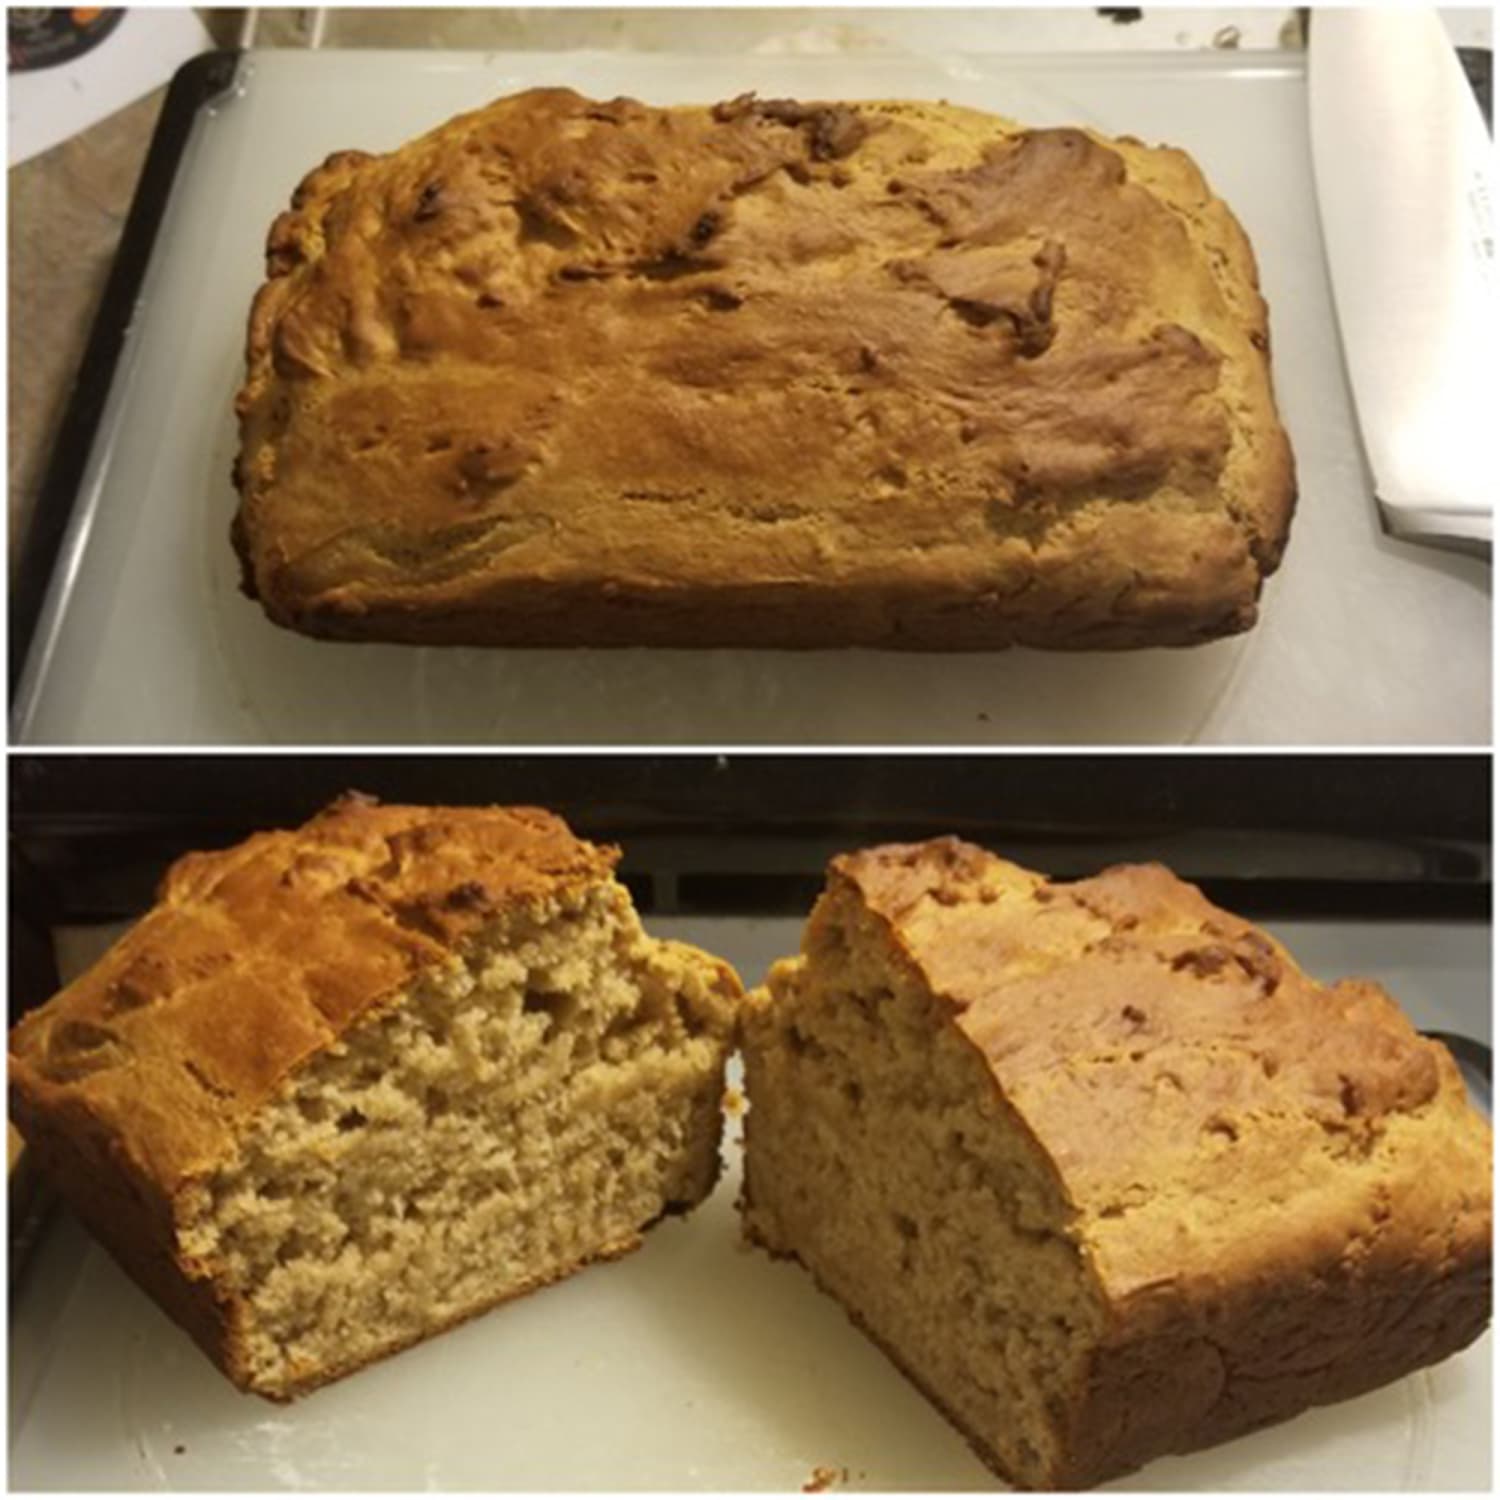 No Yeast Peanut Butter Bread From The 1930s Goes Viral